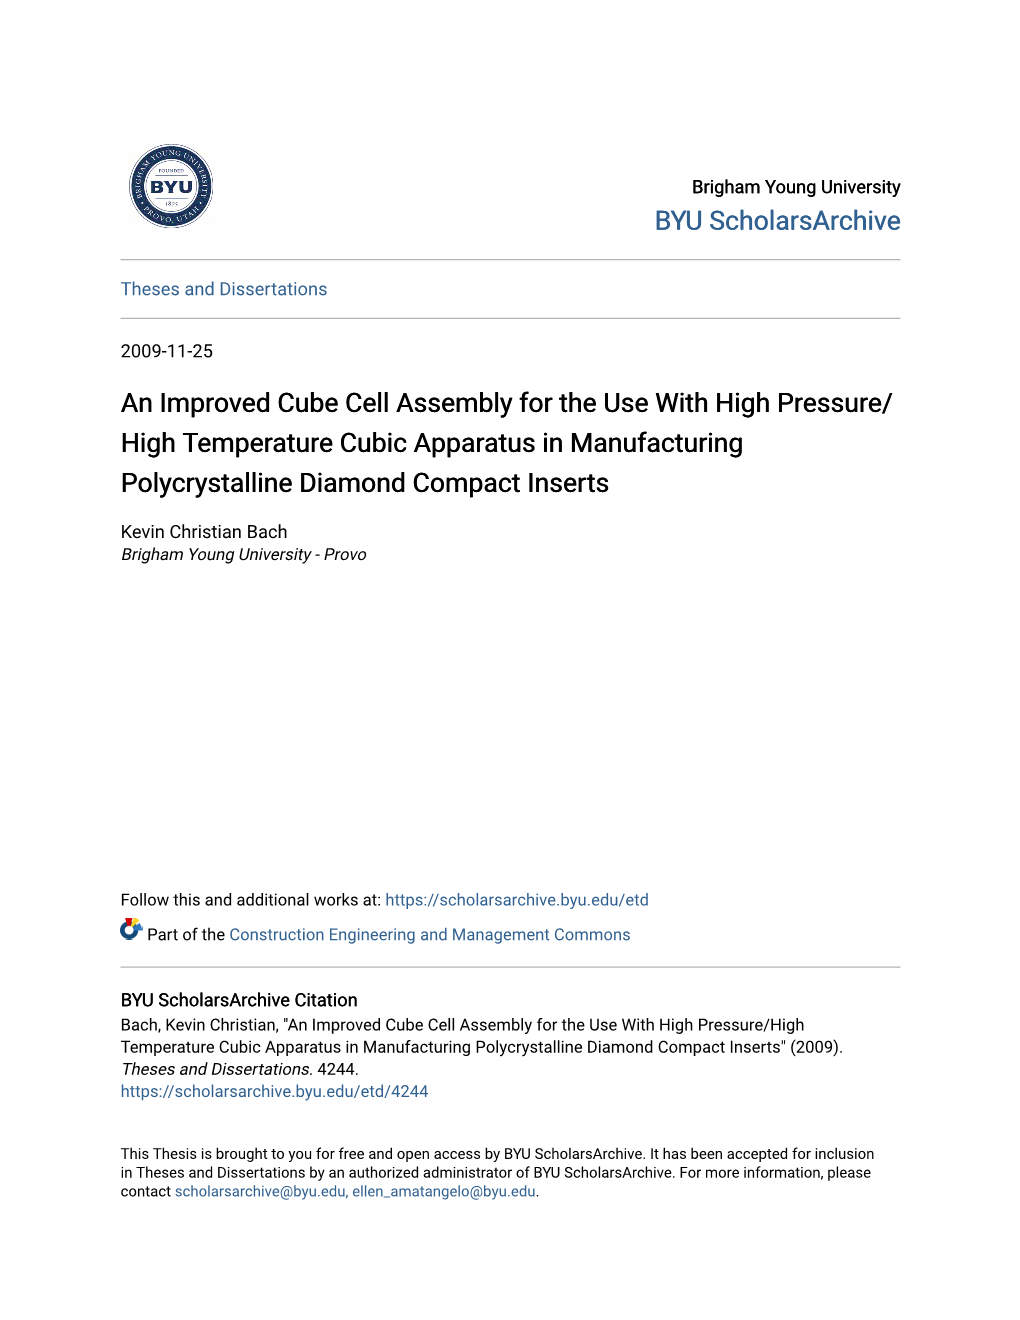 An Improved Cube Cell Assembly for the Use with High Pressure/High Temperature Cubic Apparatus in Manufacturing Polycrystalline Diamond Compact Inserts" (2009)